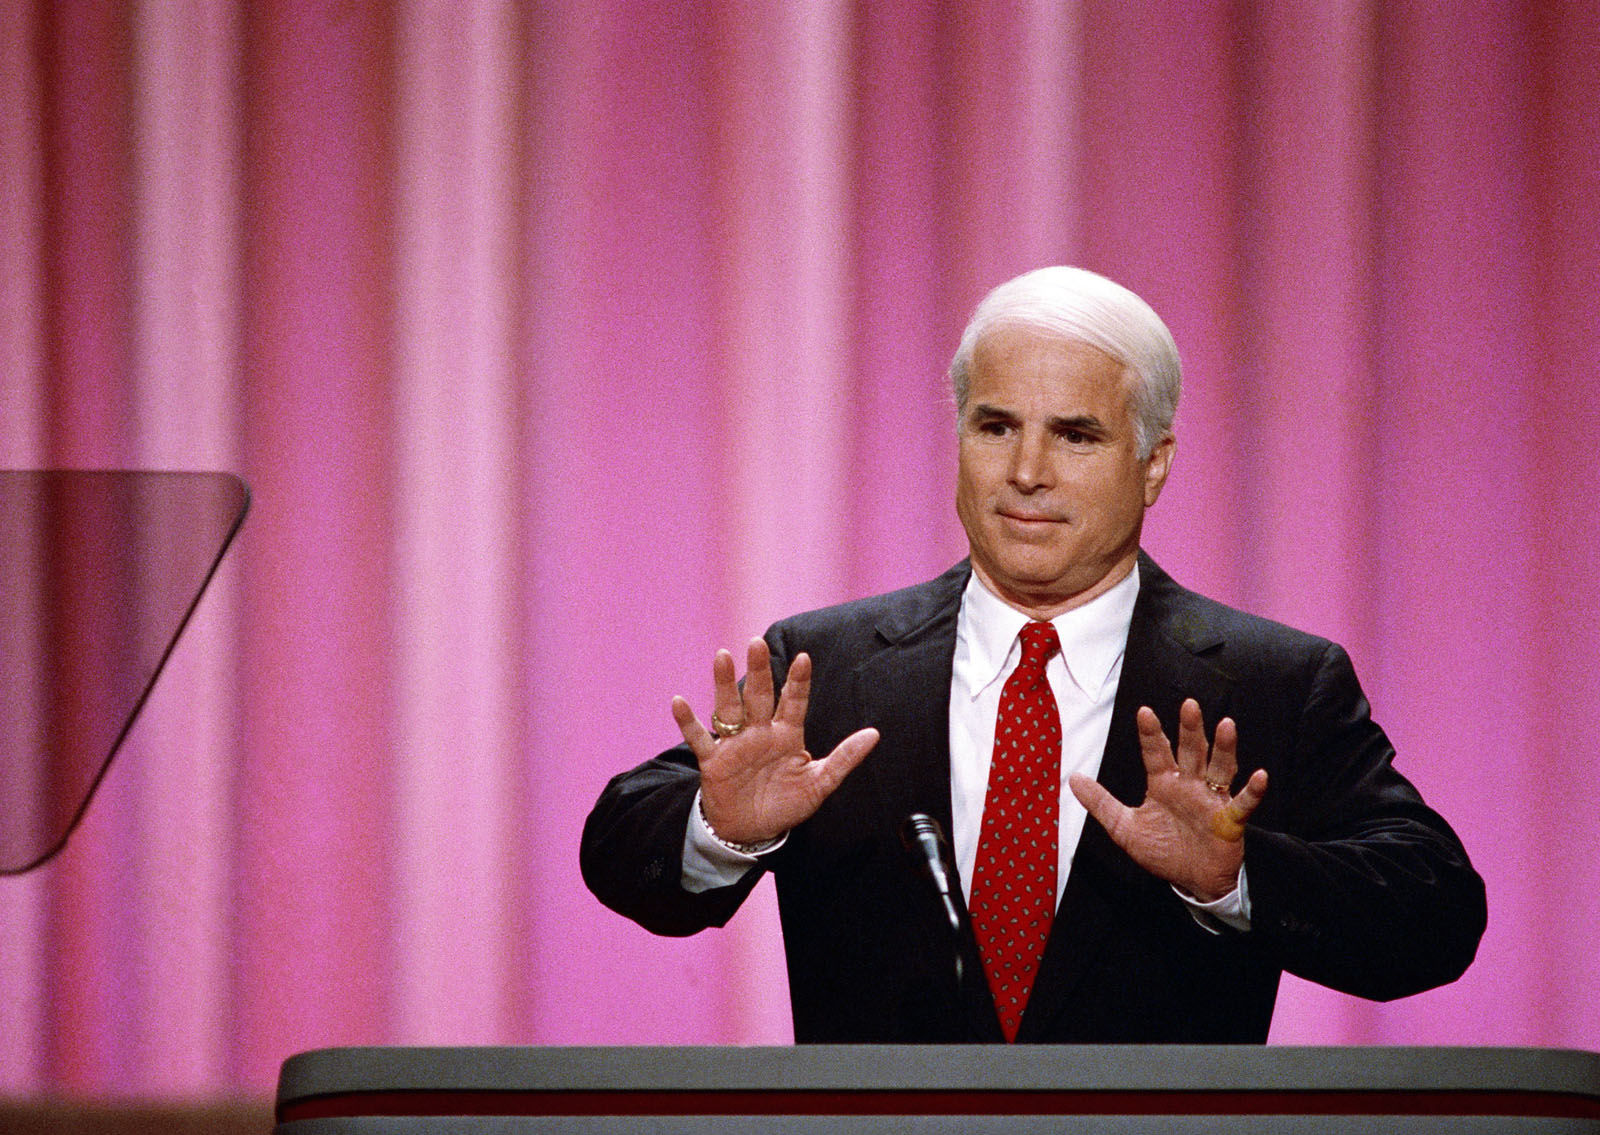 Sen. John McCain of Arizona makes a point during his address to the Republican National Convention Monday, August 16, 1988 in New Orleans.  Monday was the opening day of the convention at the Superdome. (AP Photo/Ron Edmonds)